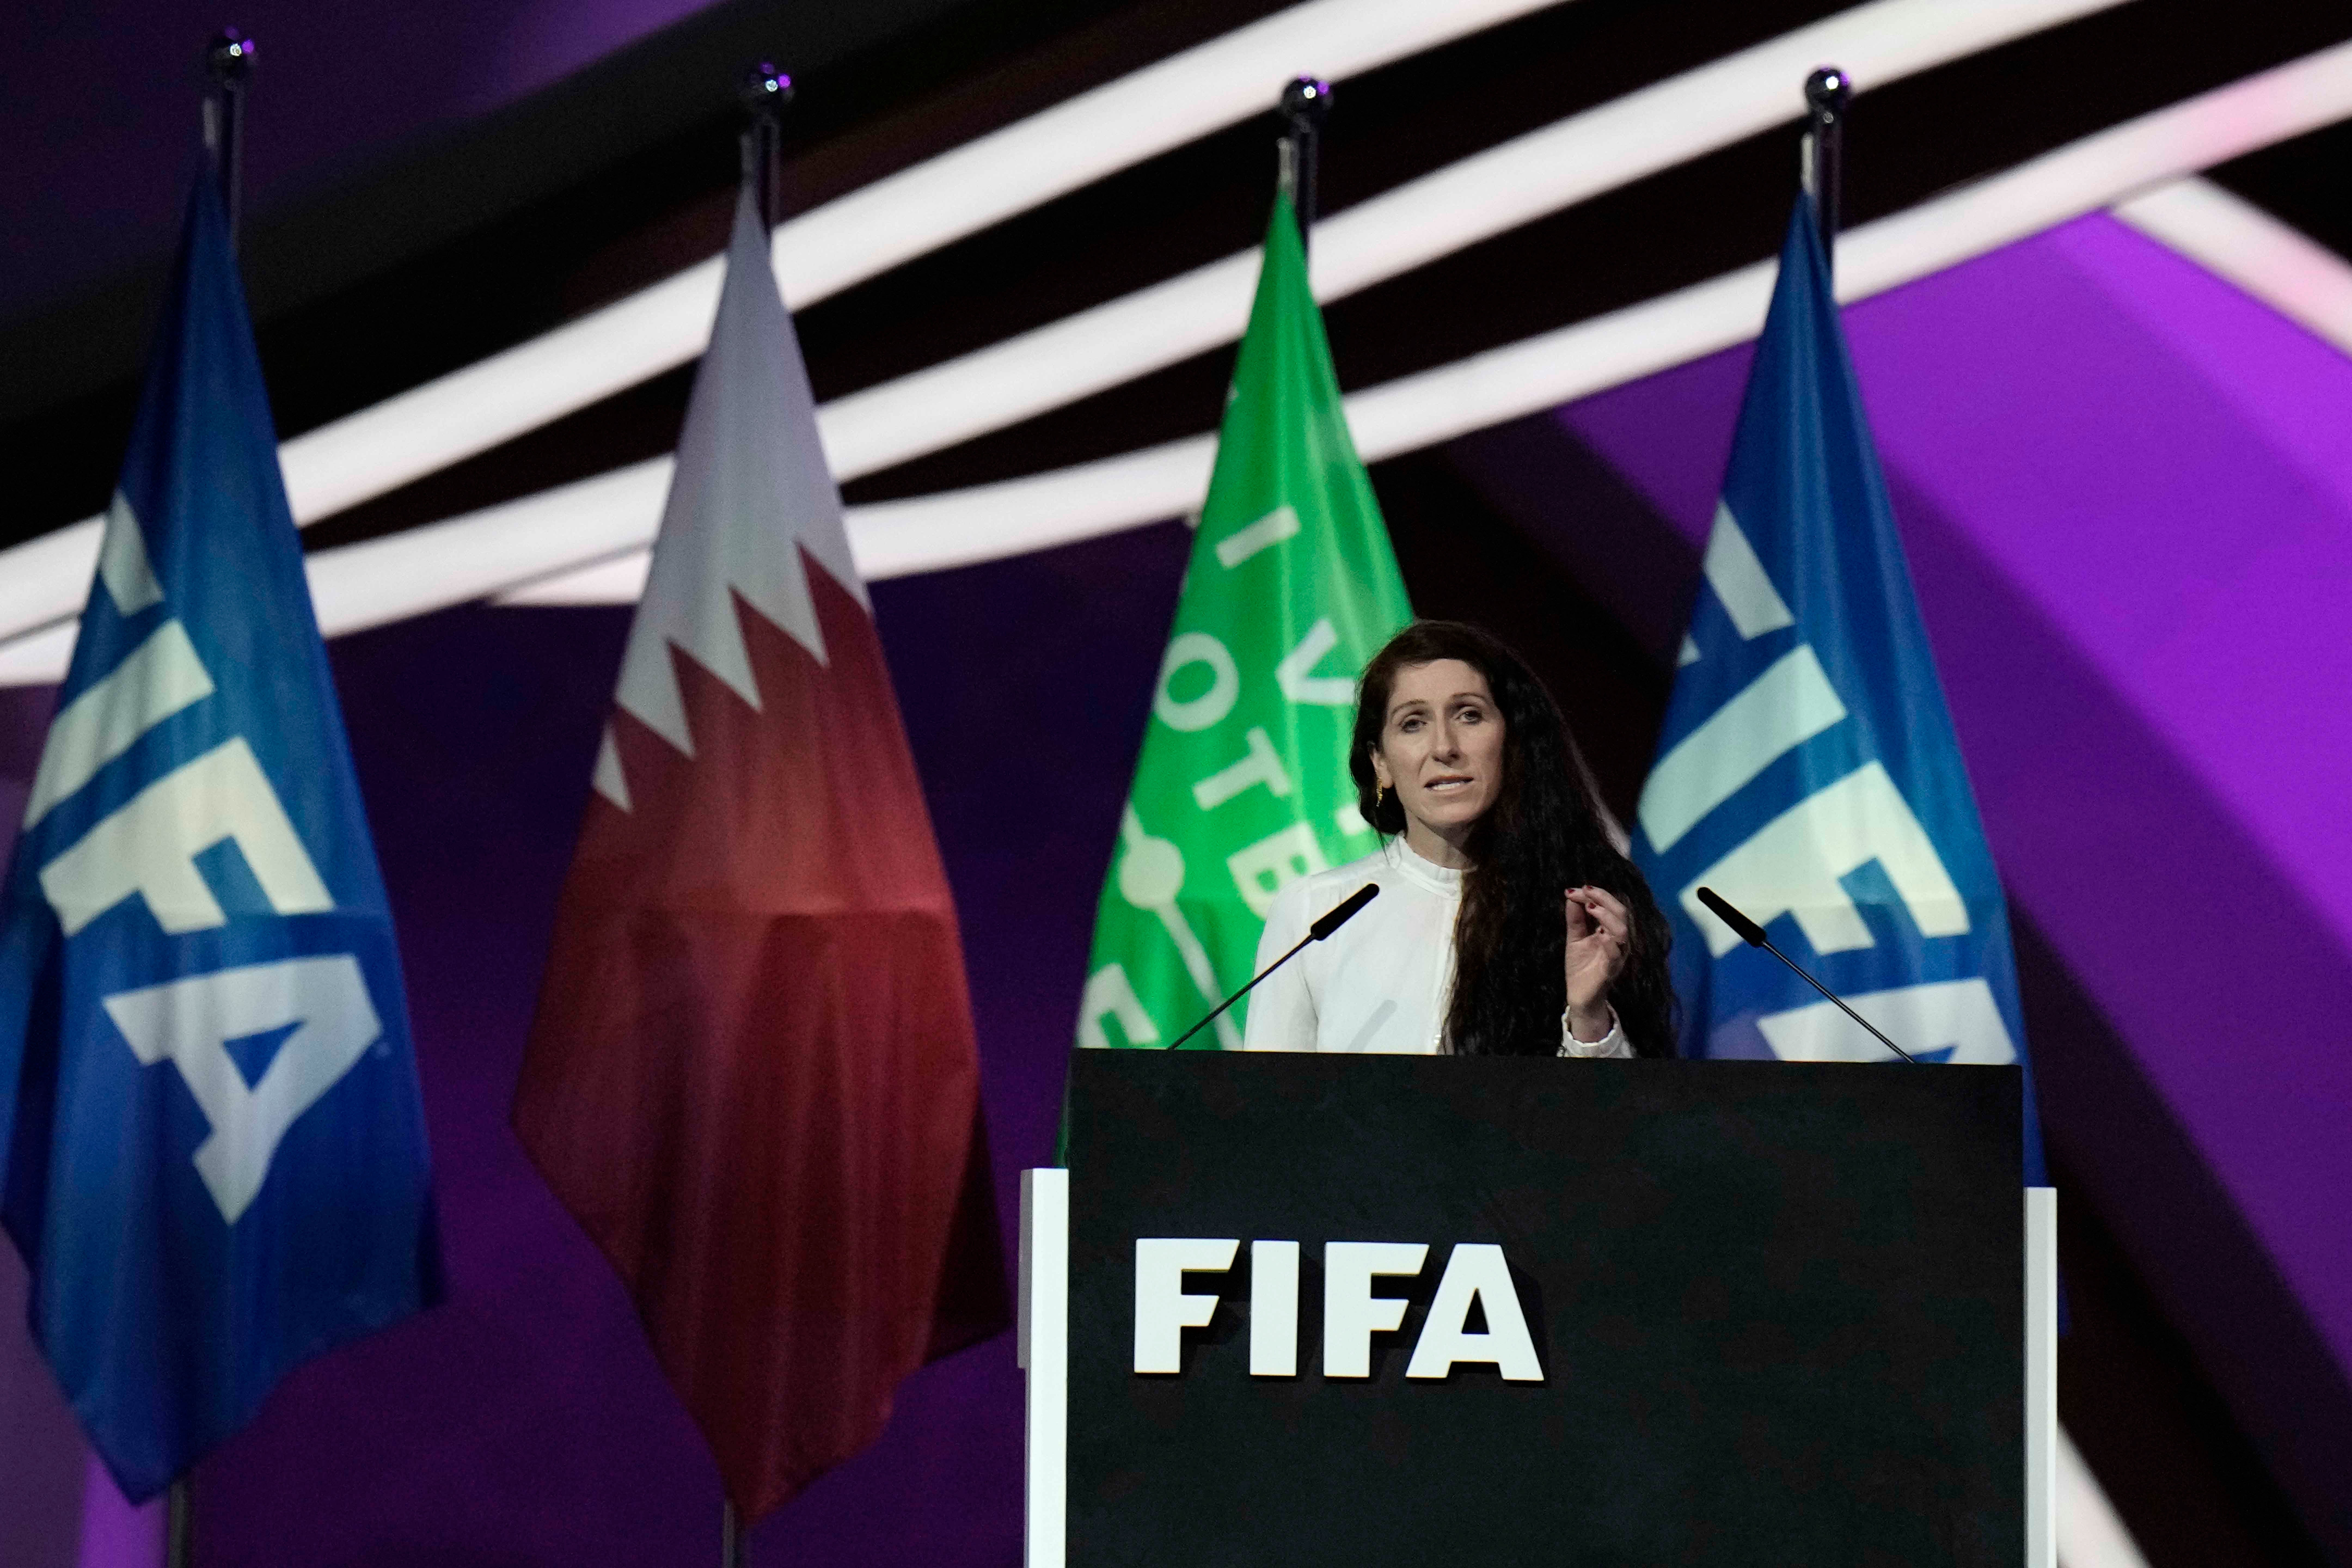 A woman speaks at a podium labeled "FIFA"